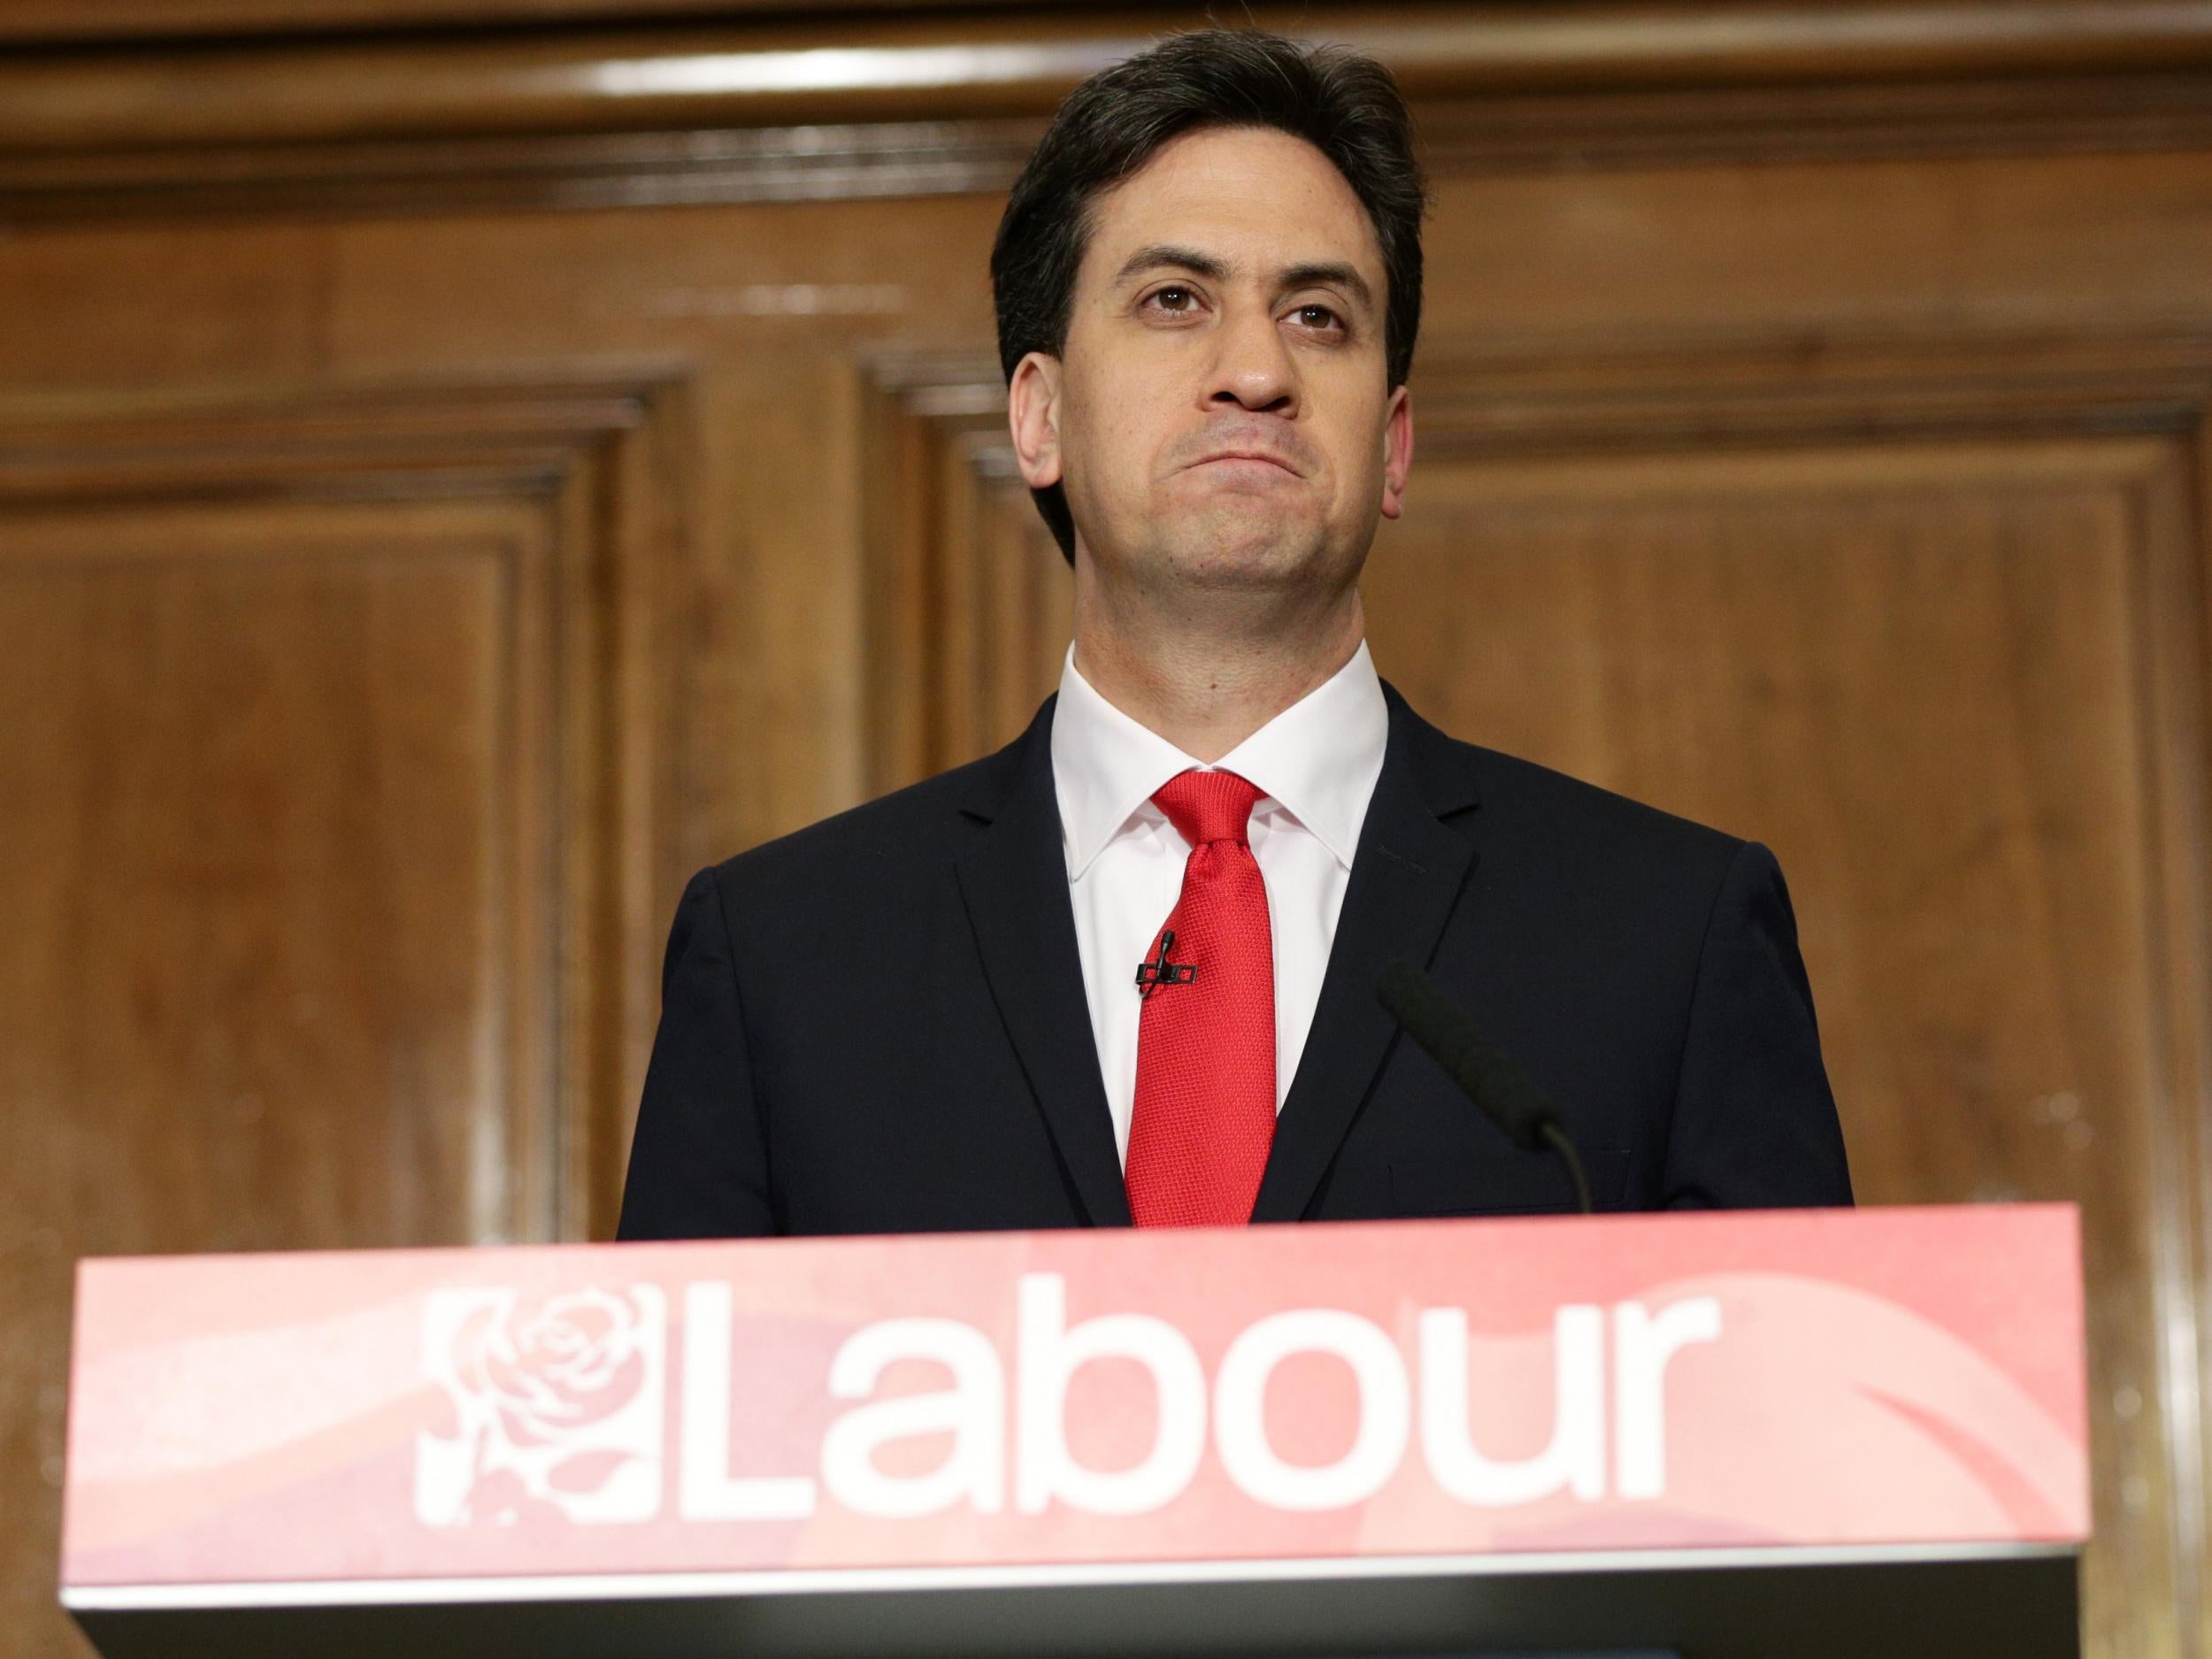 Ed Miliband resigns as Labour Party leader following defeat in 2015 general election